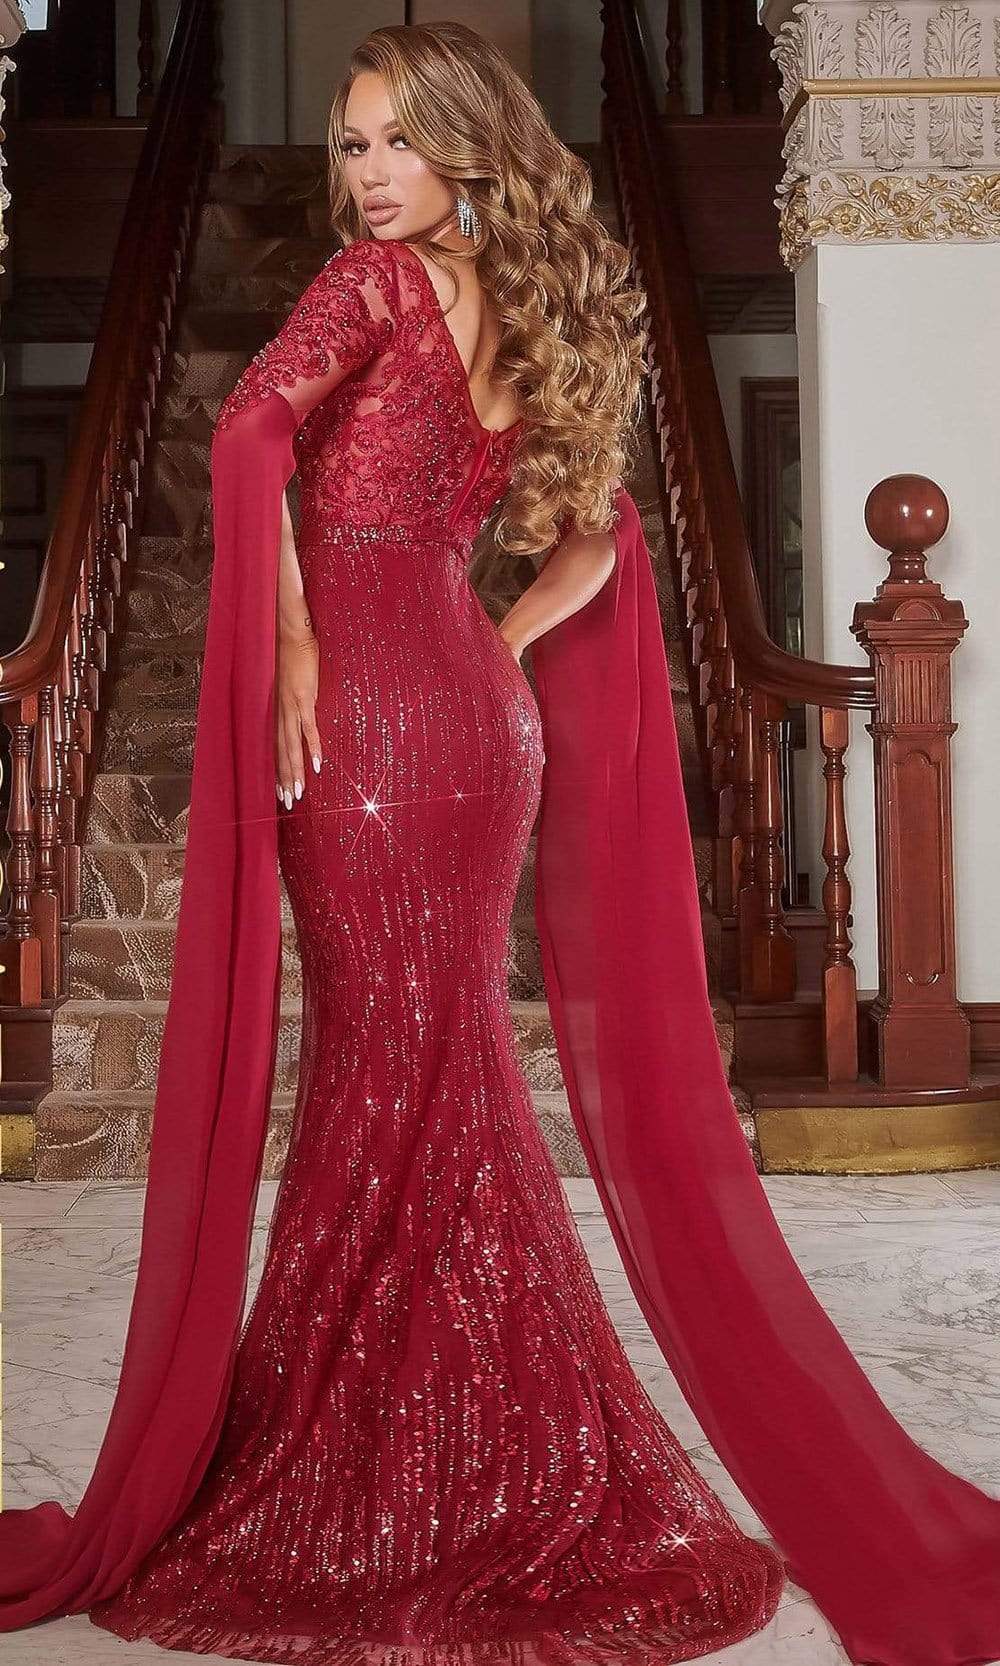 Portia and Scarlett - PS22168 Bat Sleeved Embellished Mermaid Gown Prom Dresses